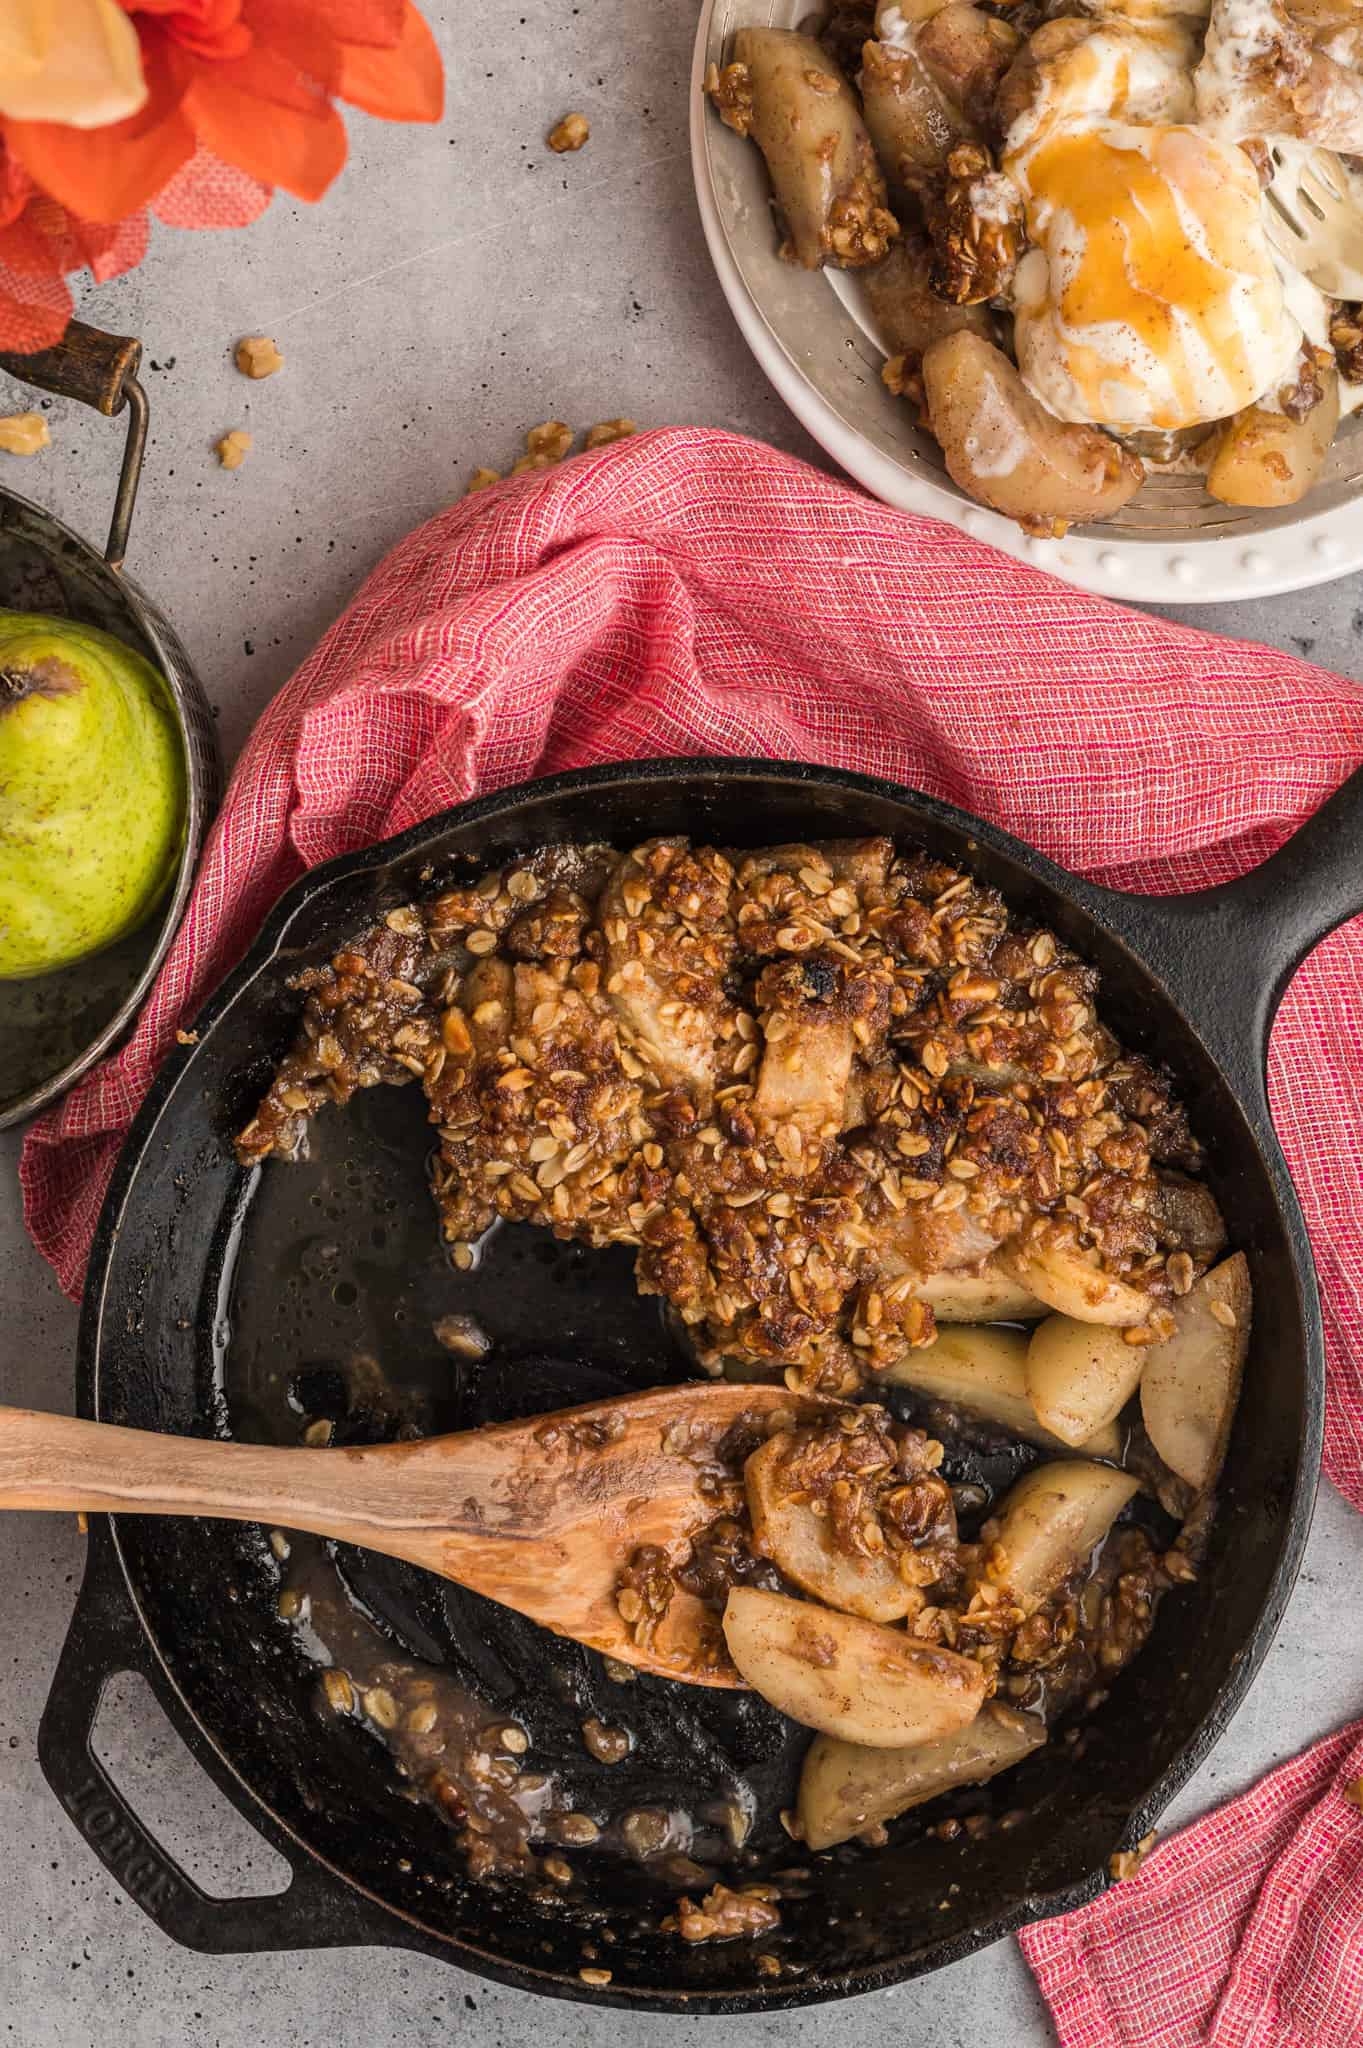 Pear Crisp is a delicious baked dessert with a sweet pear filling and a crunchy oat and walnut crumble topping.